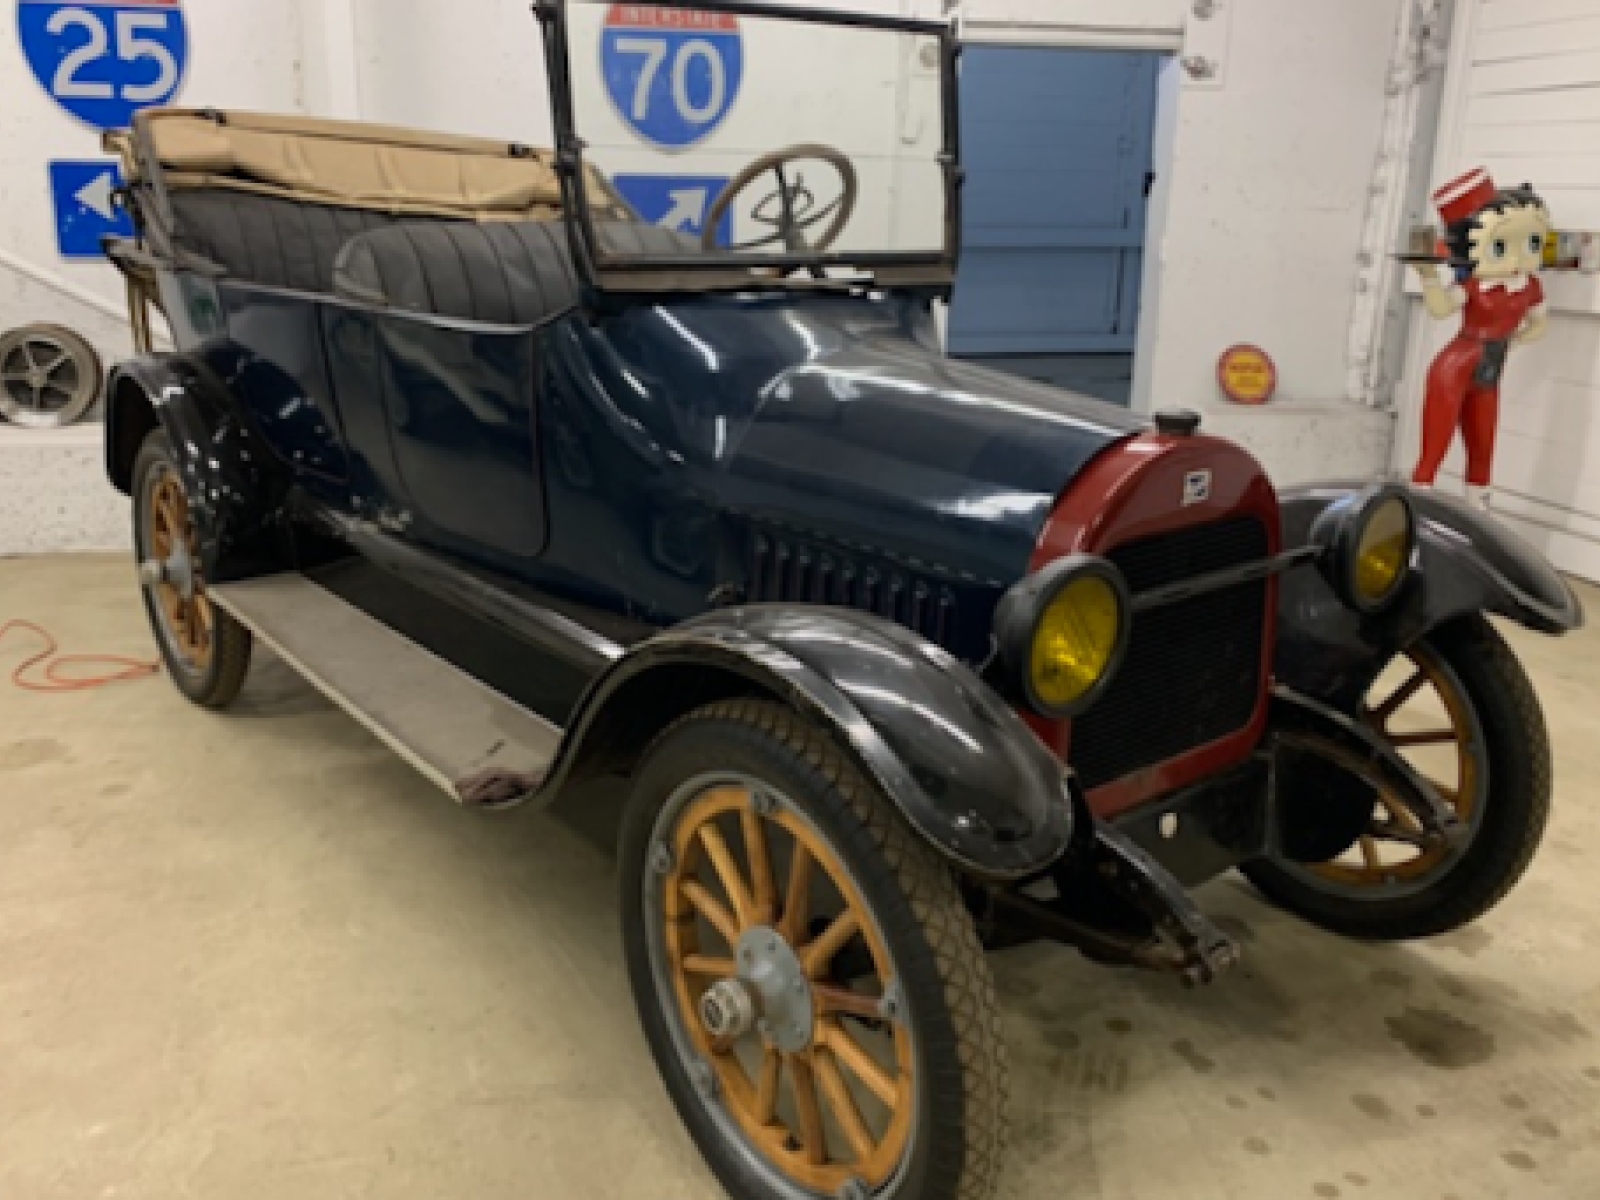 1917 Buick Touring